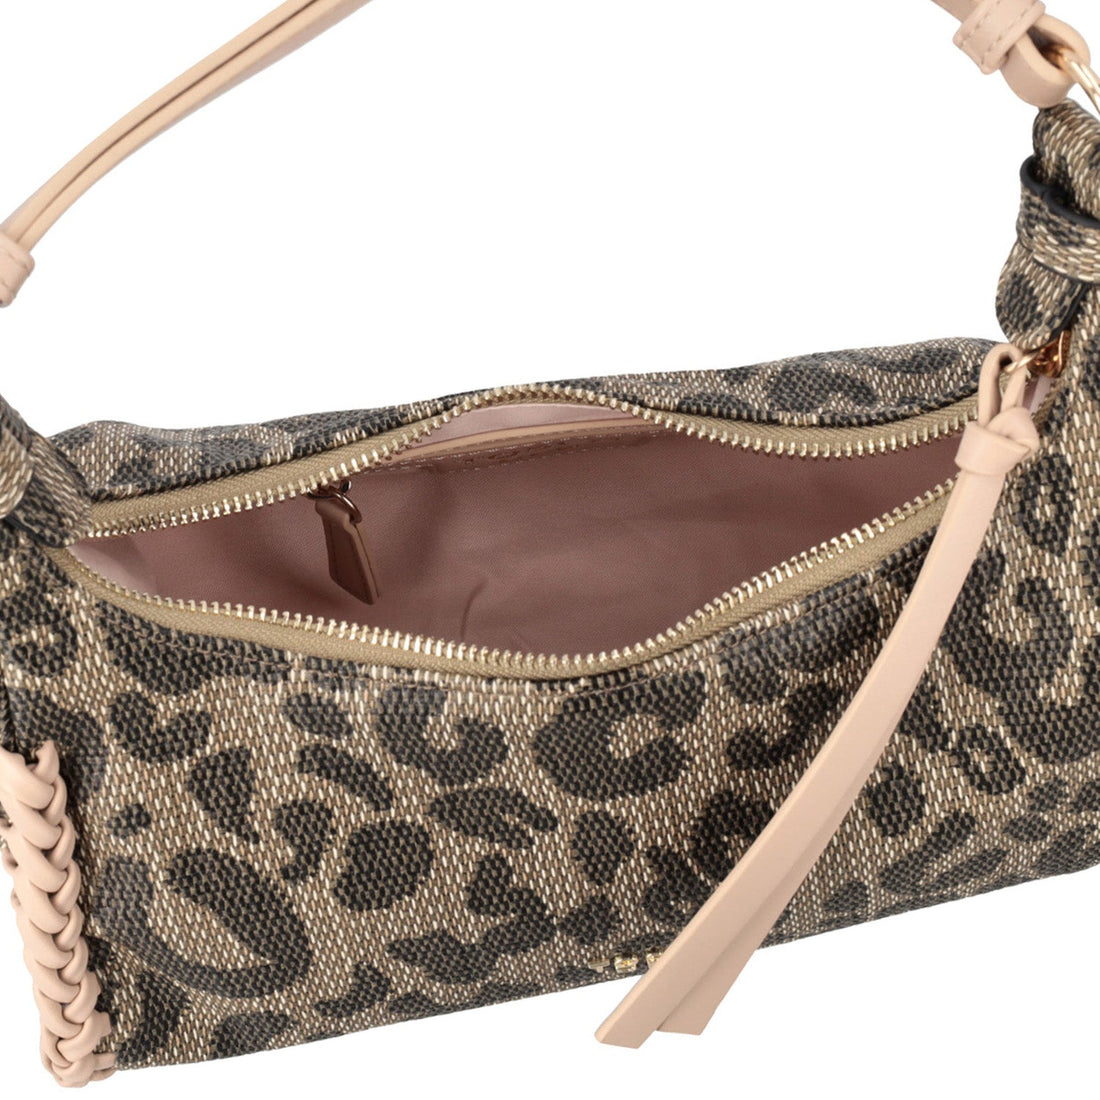 SPECKLED SMALL GERANIO BAG WITH ANIMAL PRINT